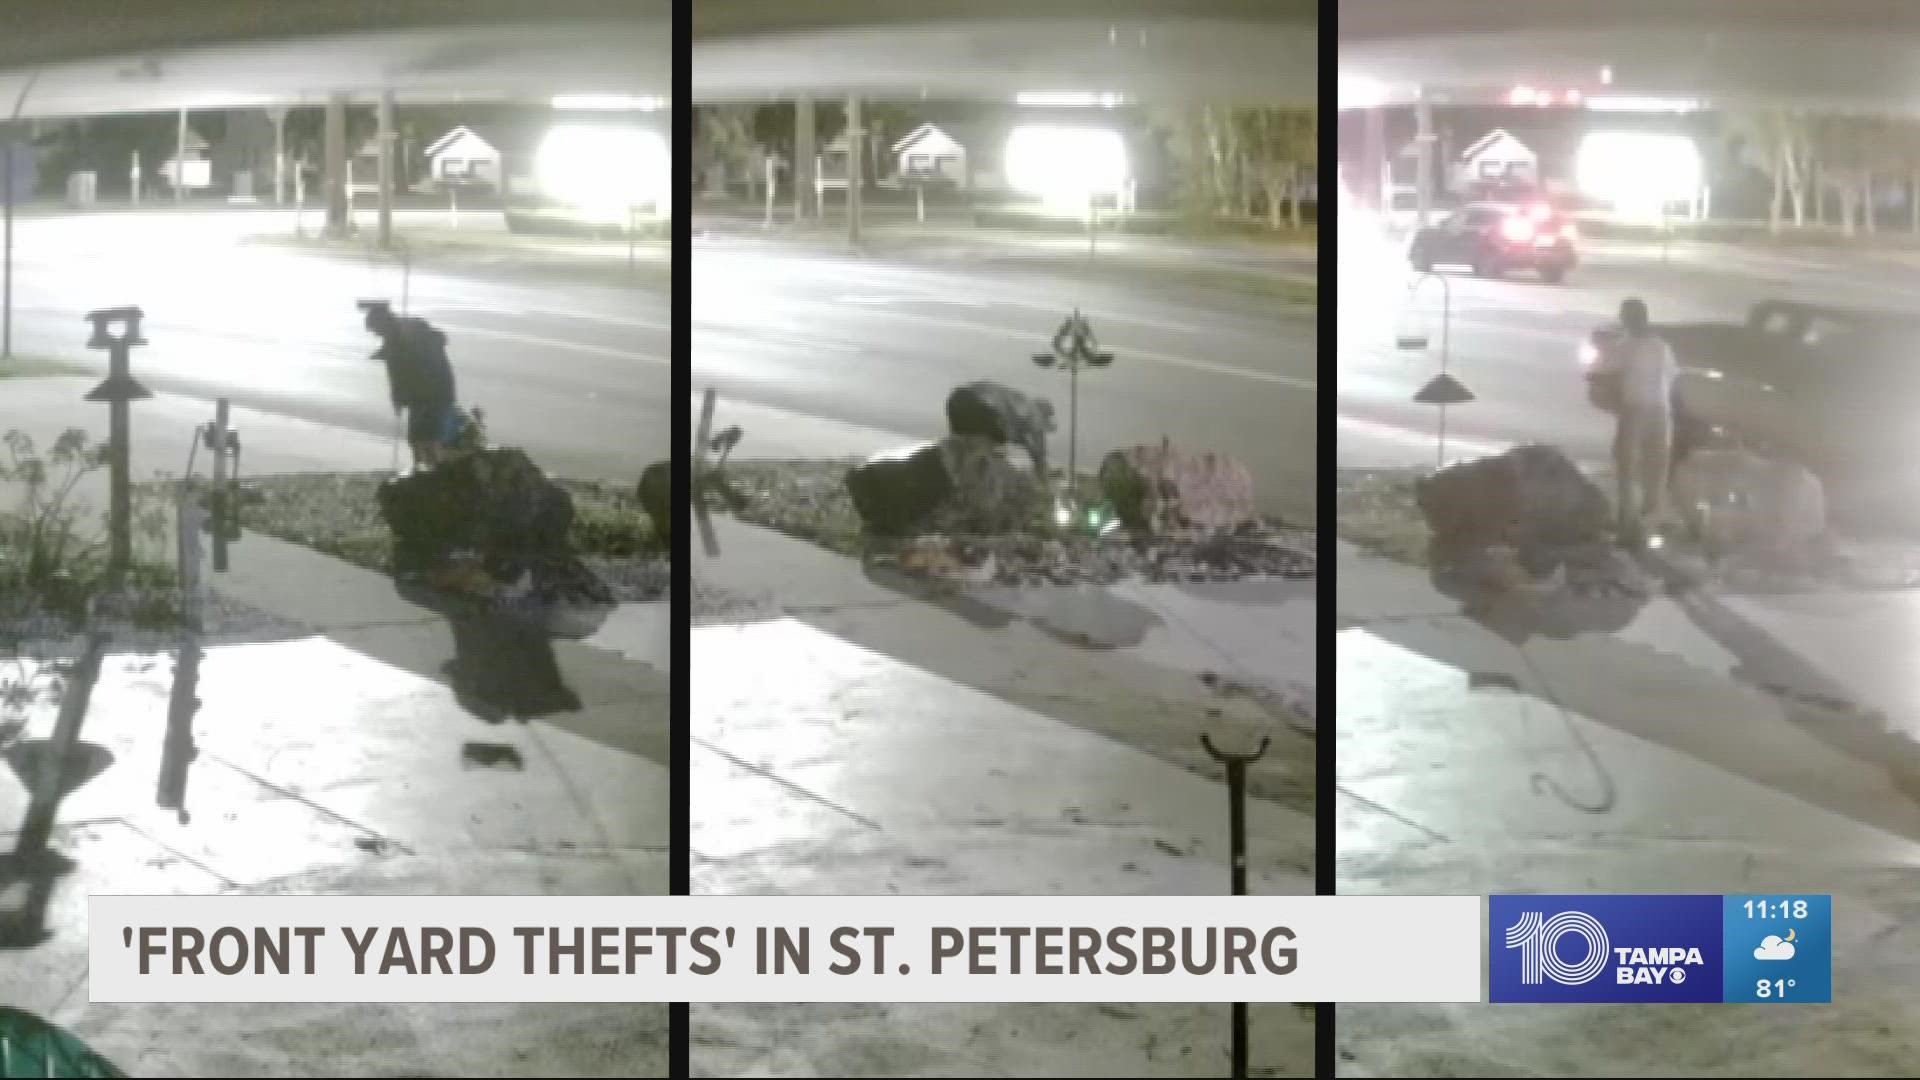 One woman who lives in St. Petersburg's Central Oak Park neighborhood has had lawn ornaments stolen three times this year, each incident caught on video.